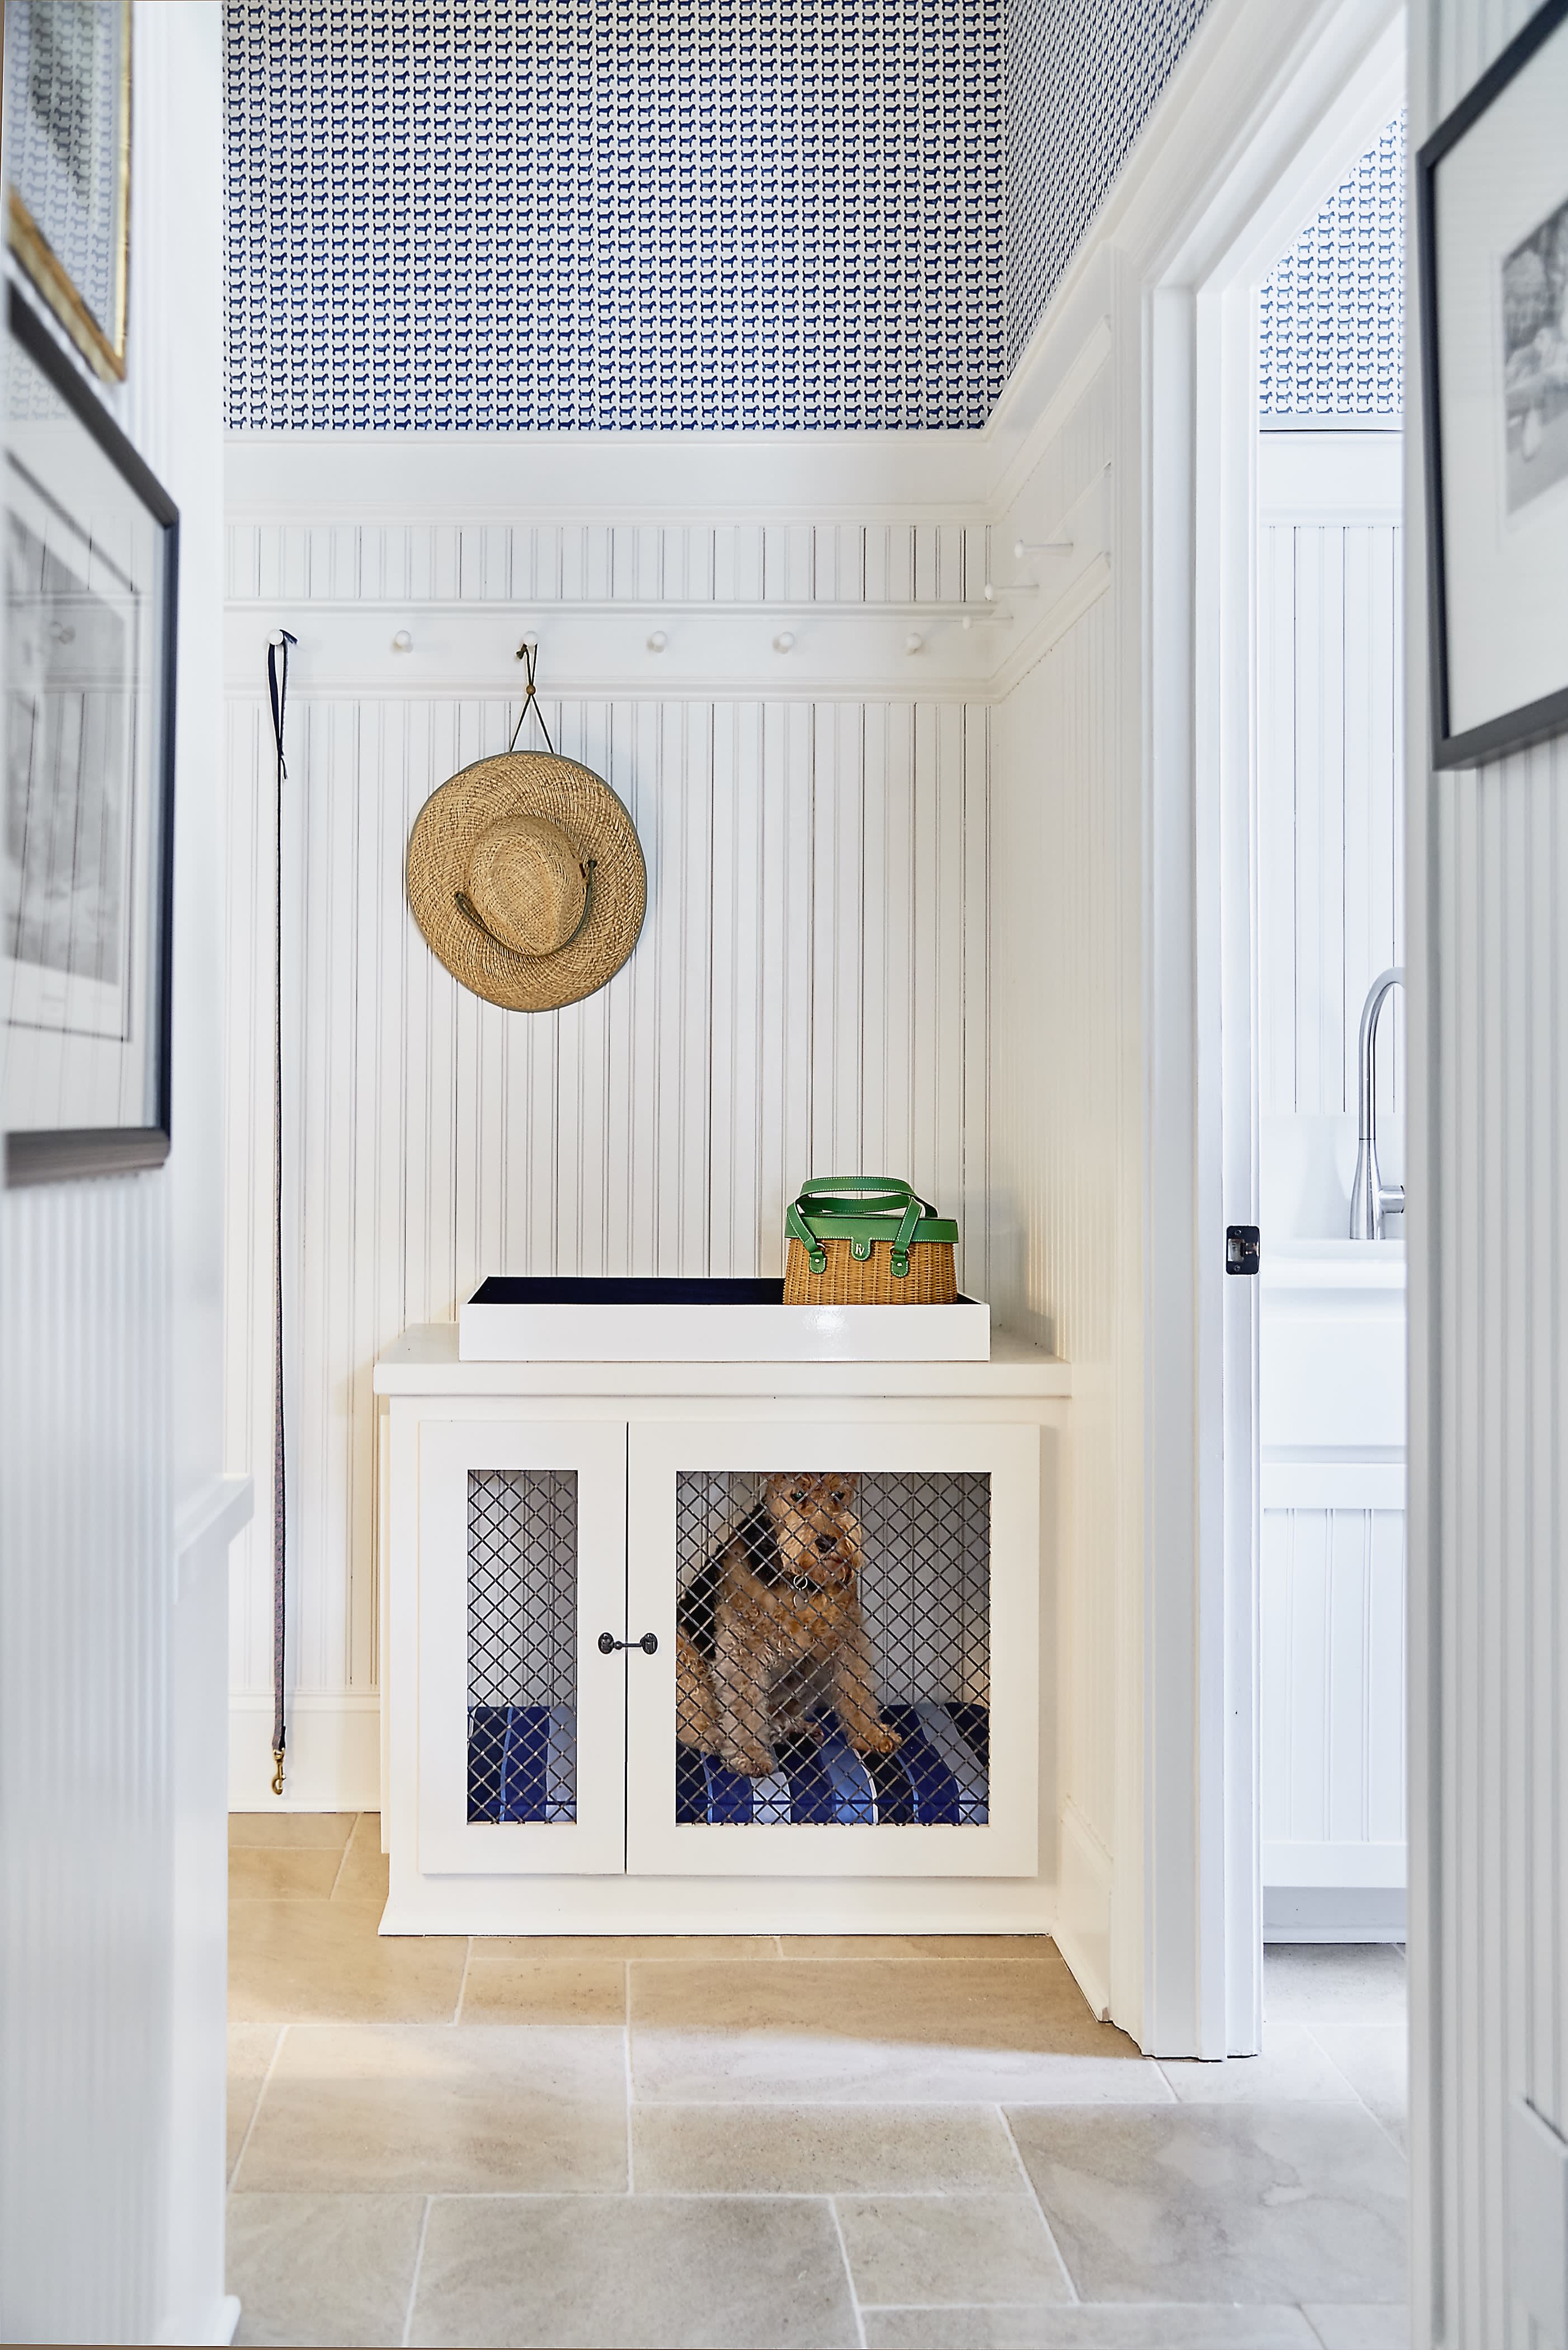 Our Top 10 Pet-Friendly Chic Home Accessories